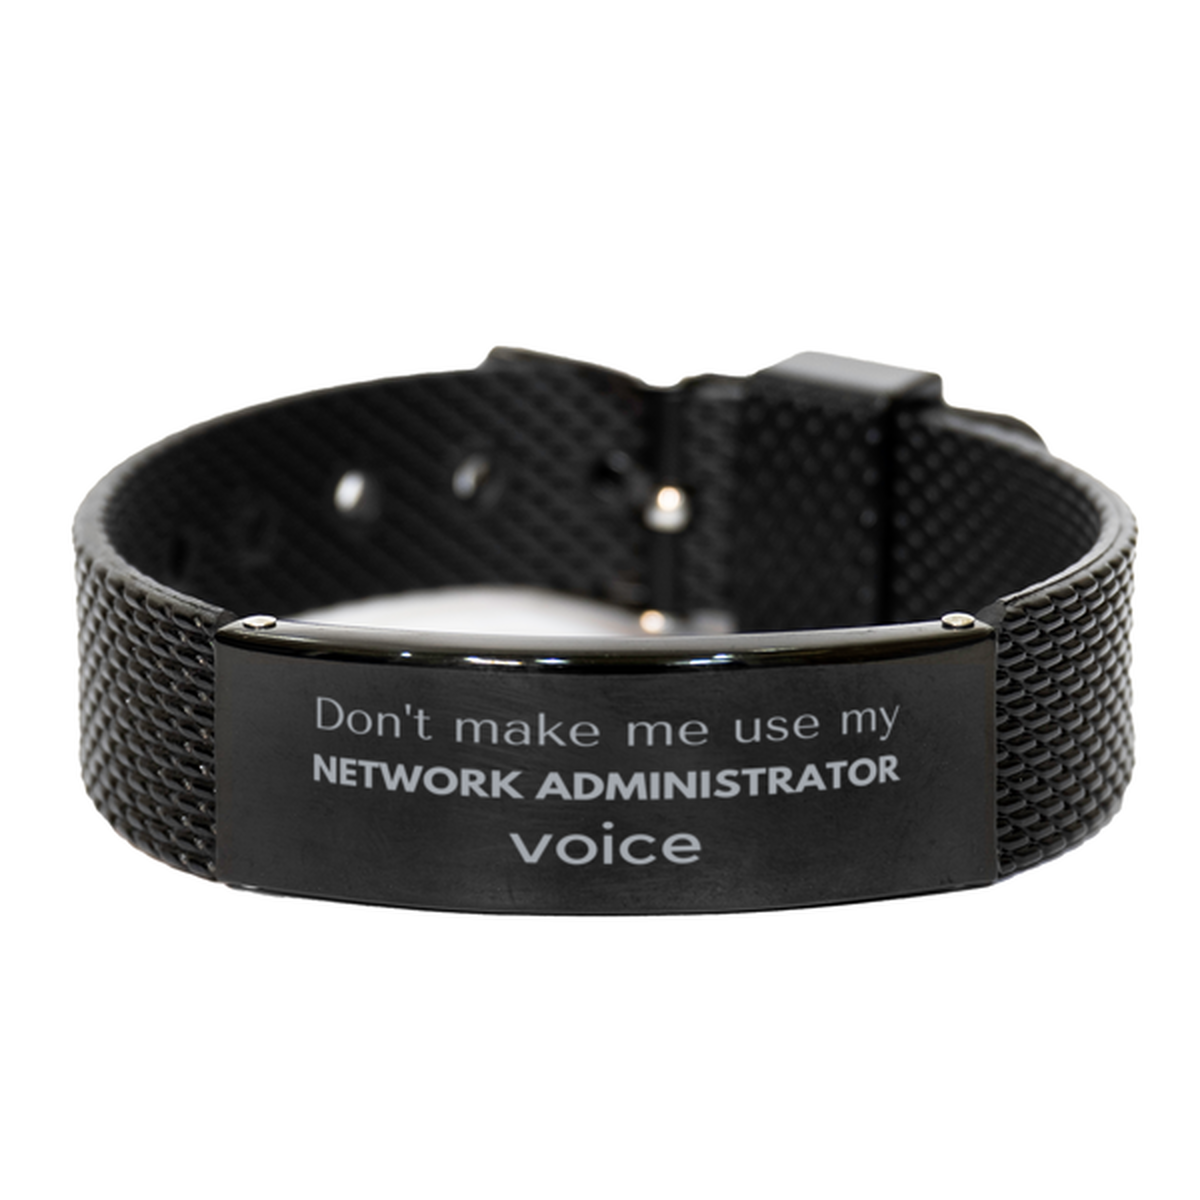 Don't make me use my Network Administrator voice, Sarcasm Network Administrator Gifts, Christmas Network Administrator Black Shark Mesh Bracelet Birthday Unique Gifts For Network Administrator Coworkers, Men, Women, Colleague, Friends